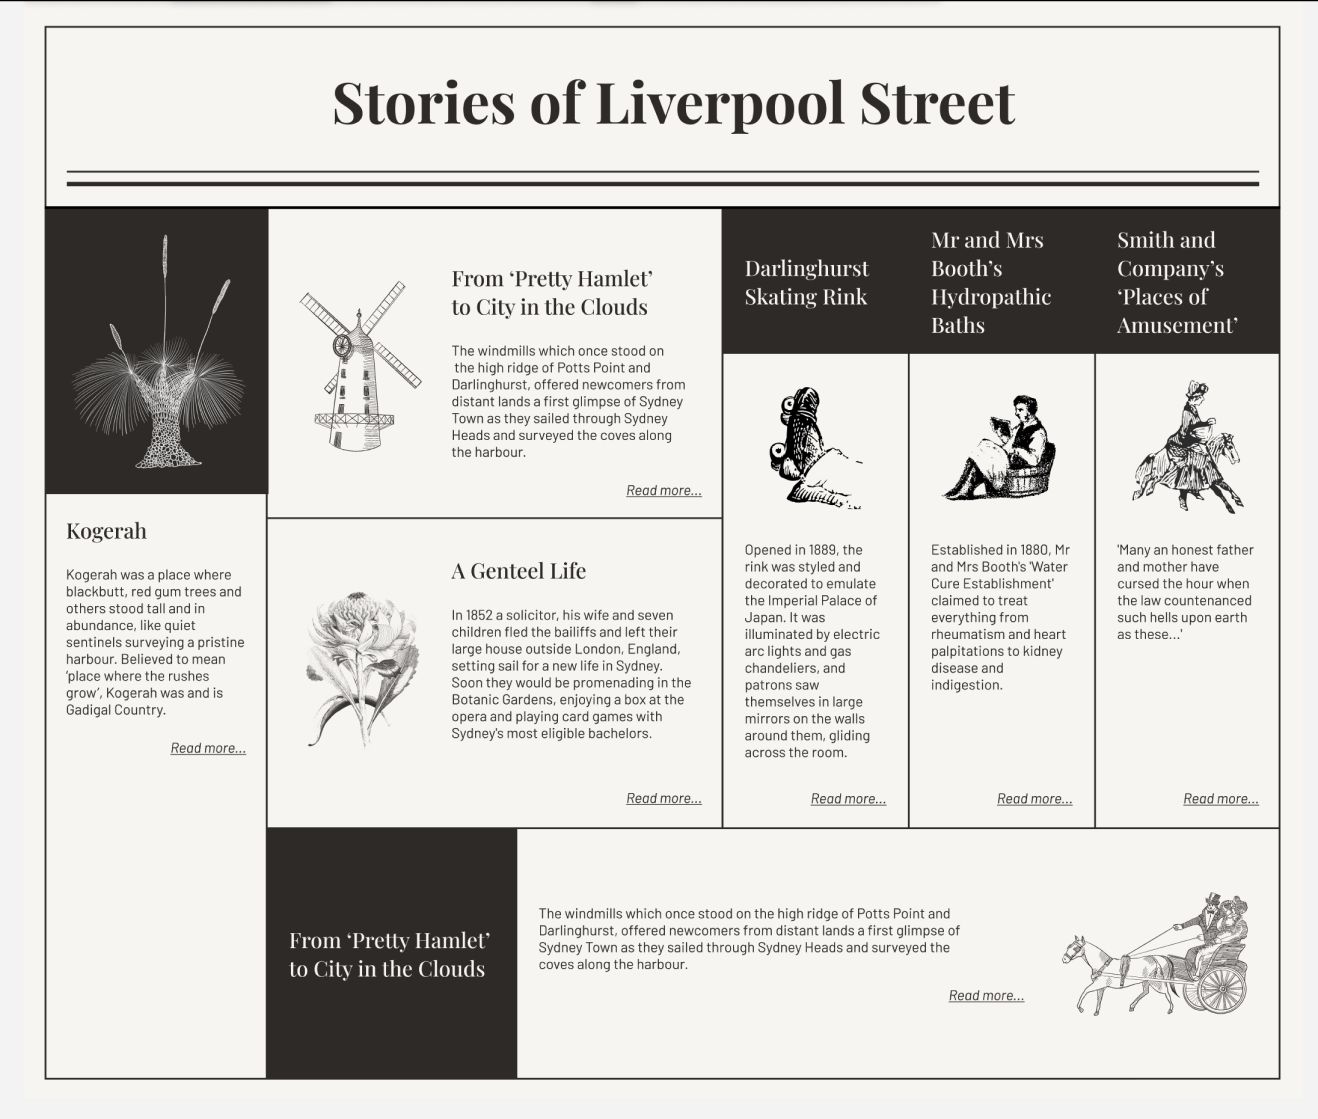 Alternative tile layout for stories of Liverpool Street in the home page.